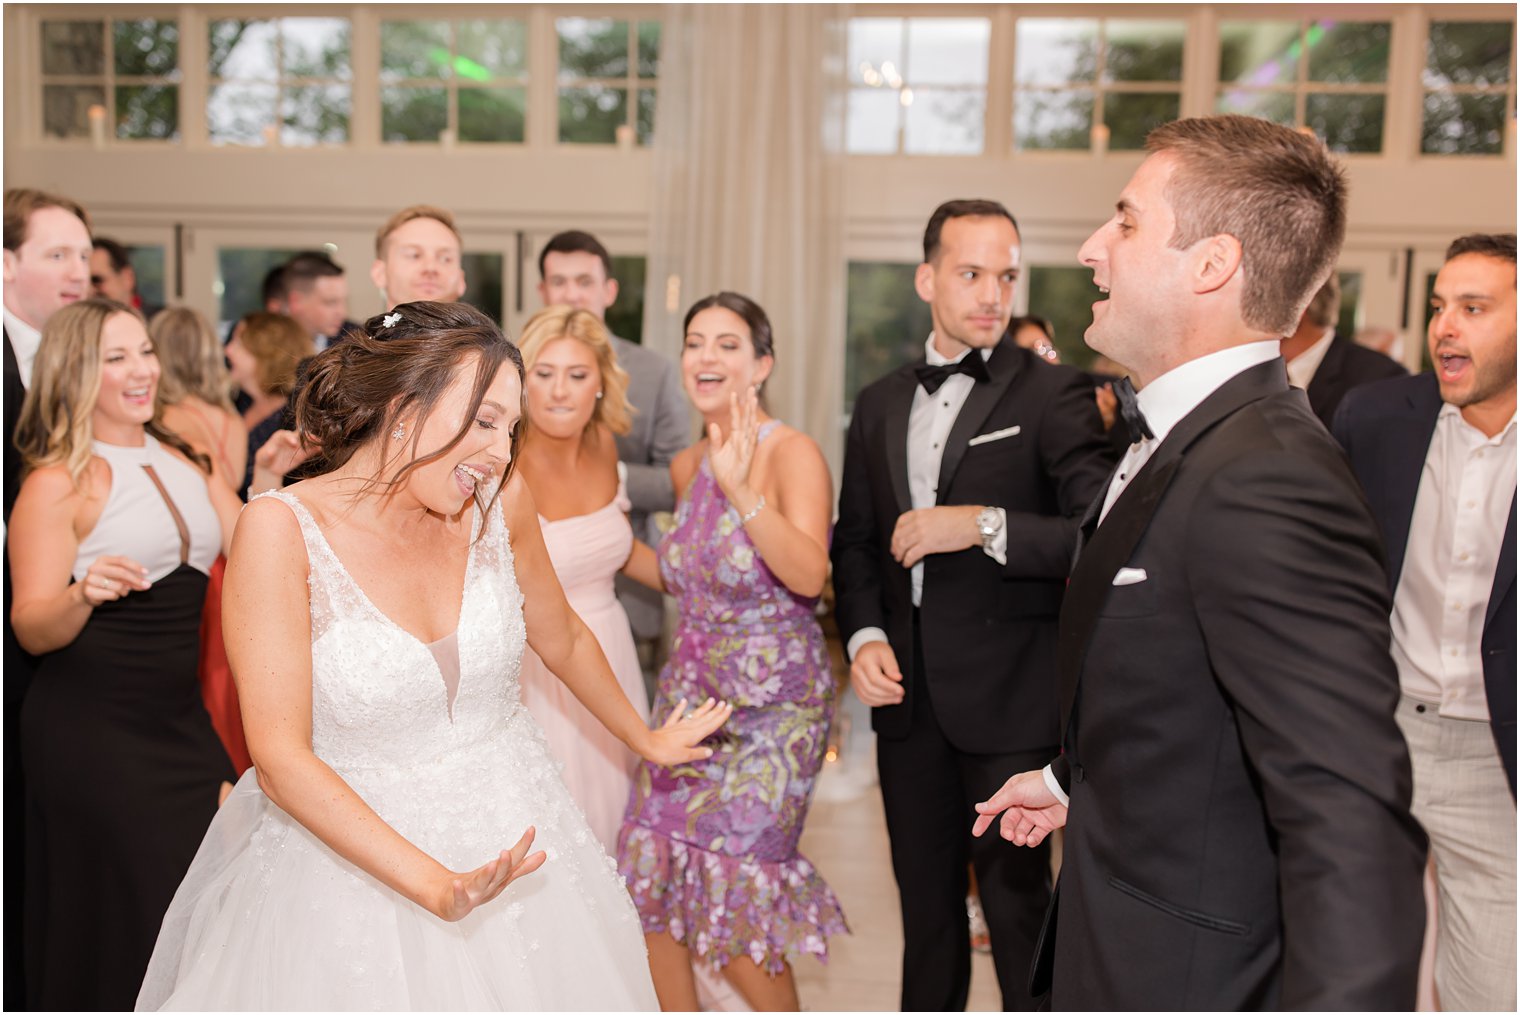 newlyweds dance with guests at Franklin Lakes NJ wedding reception